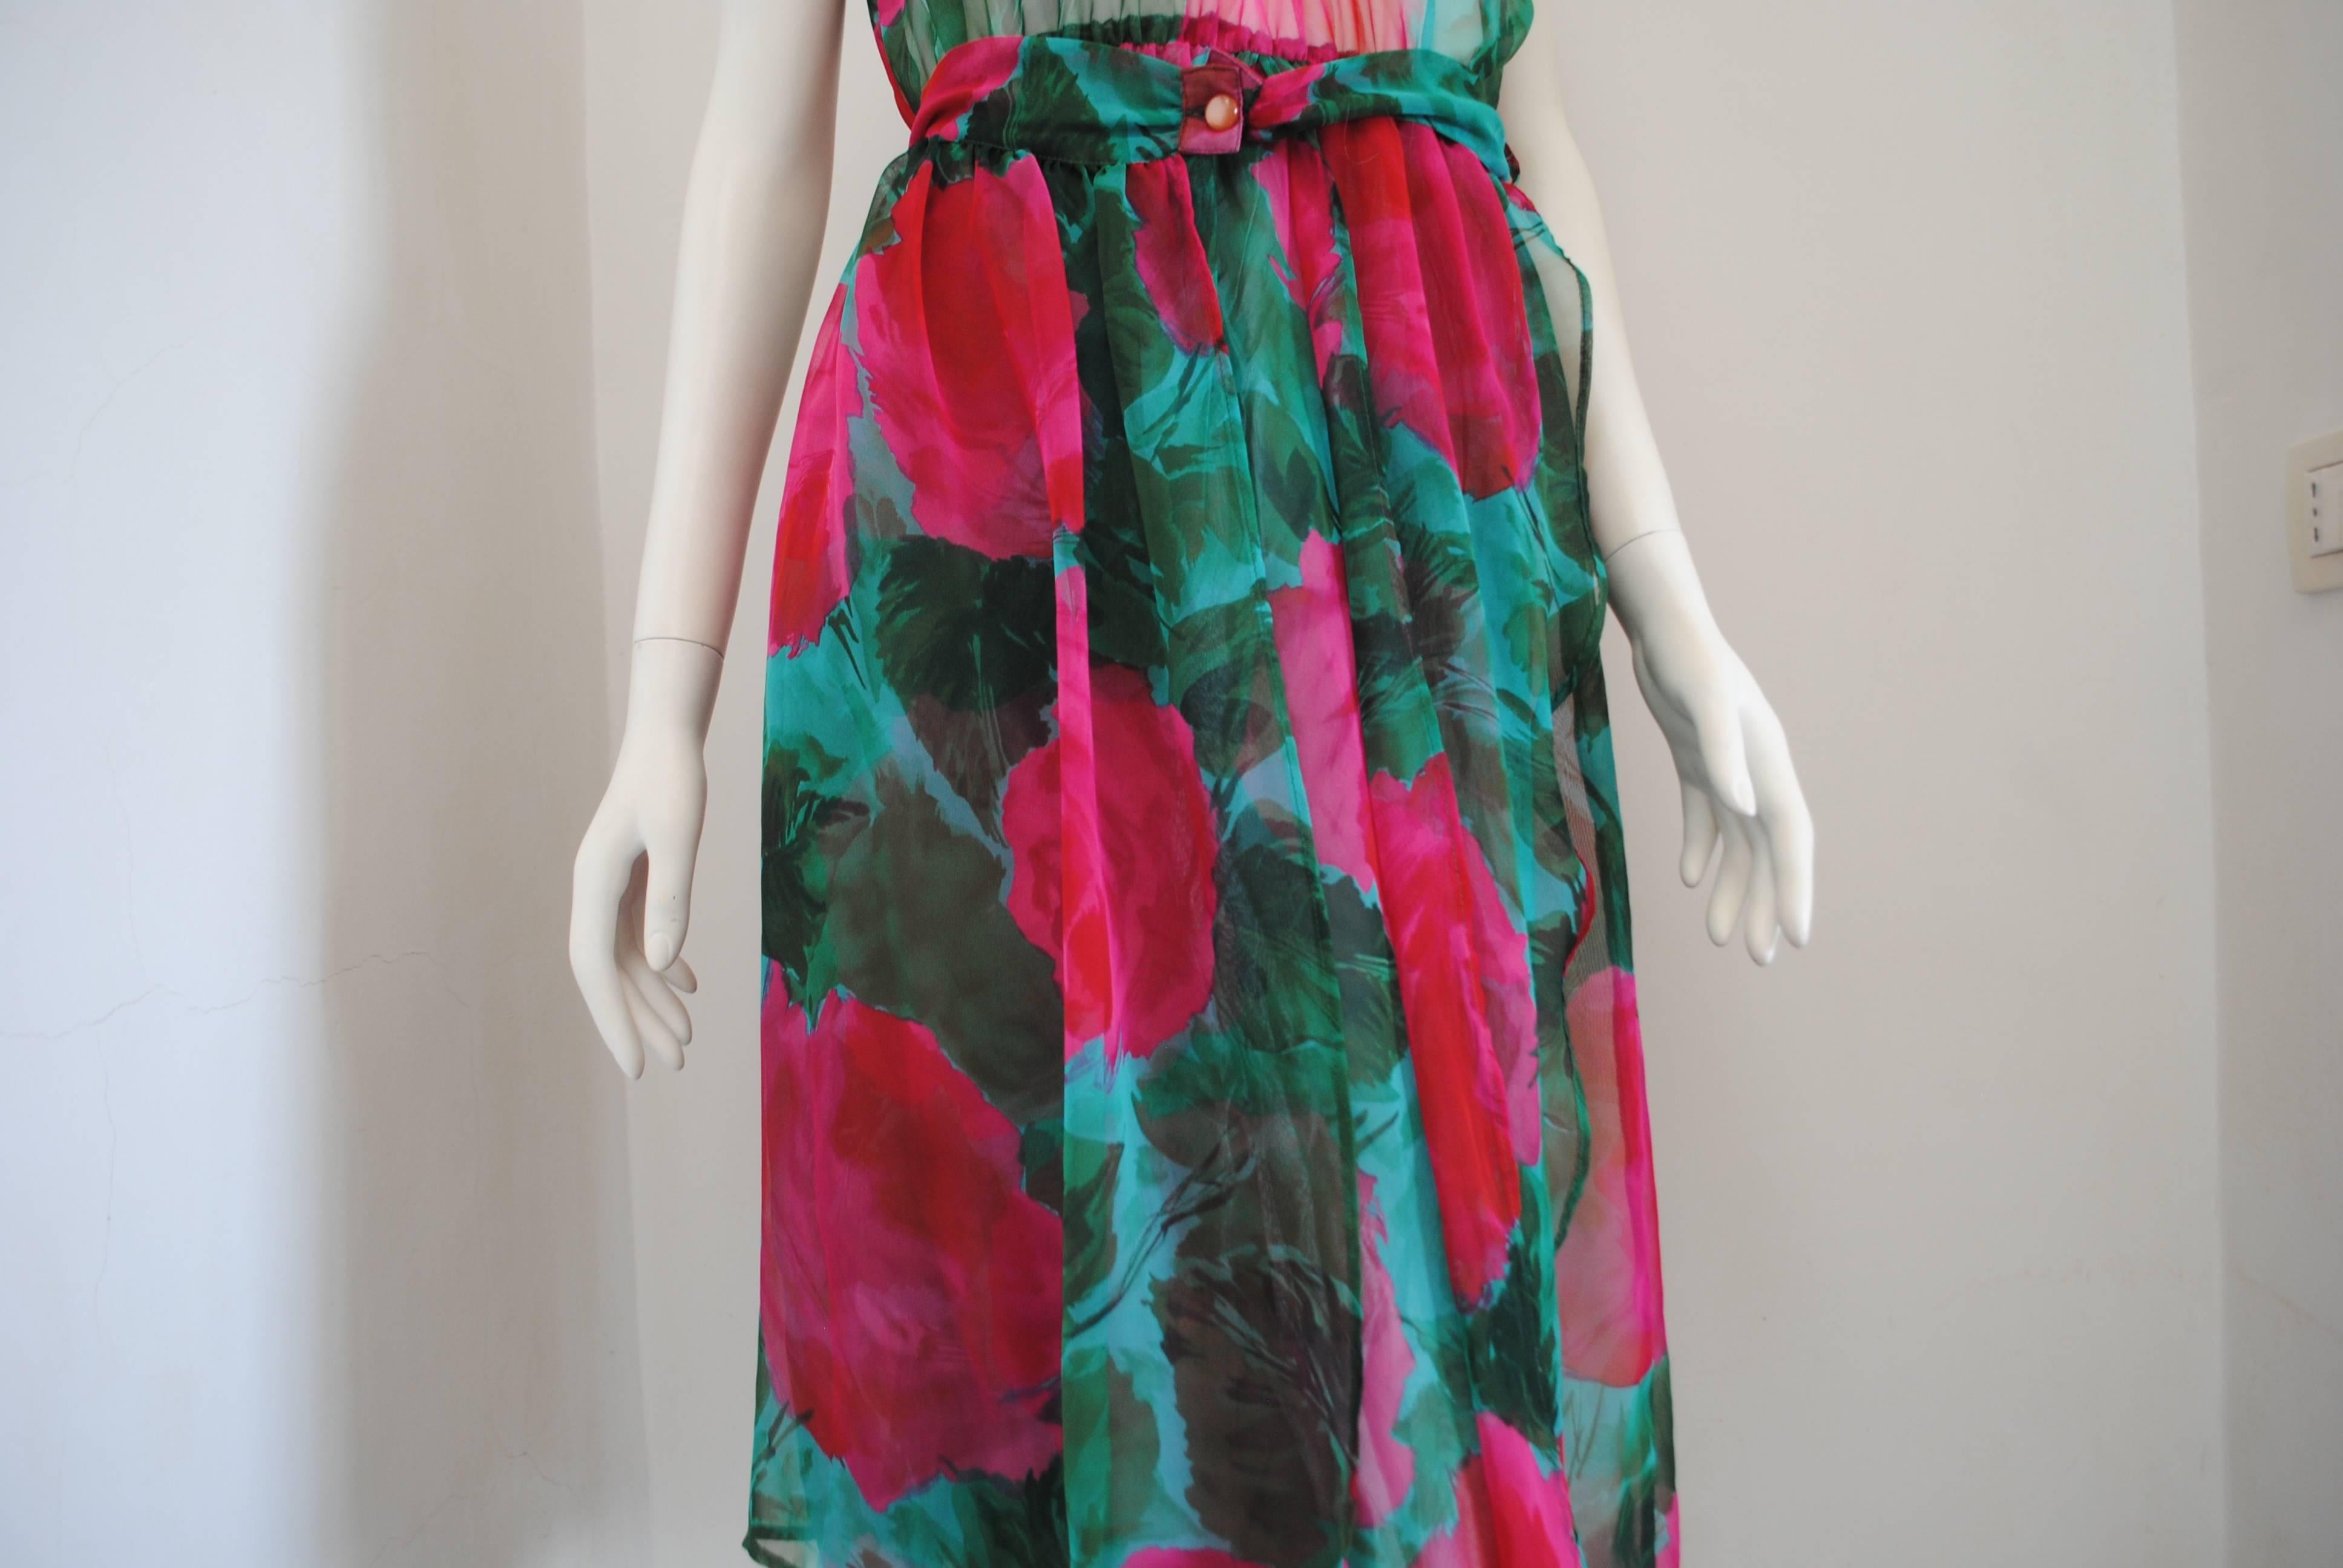 1980s Vintage Green Flower Dress

Green with fucsia flowers all over vintage dress. See through bust with belt embellished by pink botton.

Composition: others

Totally made in italy in italian size range 42